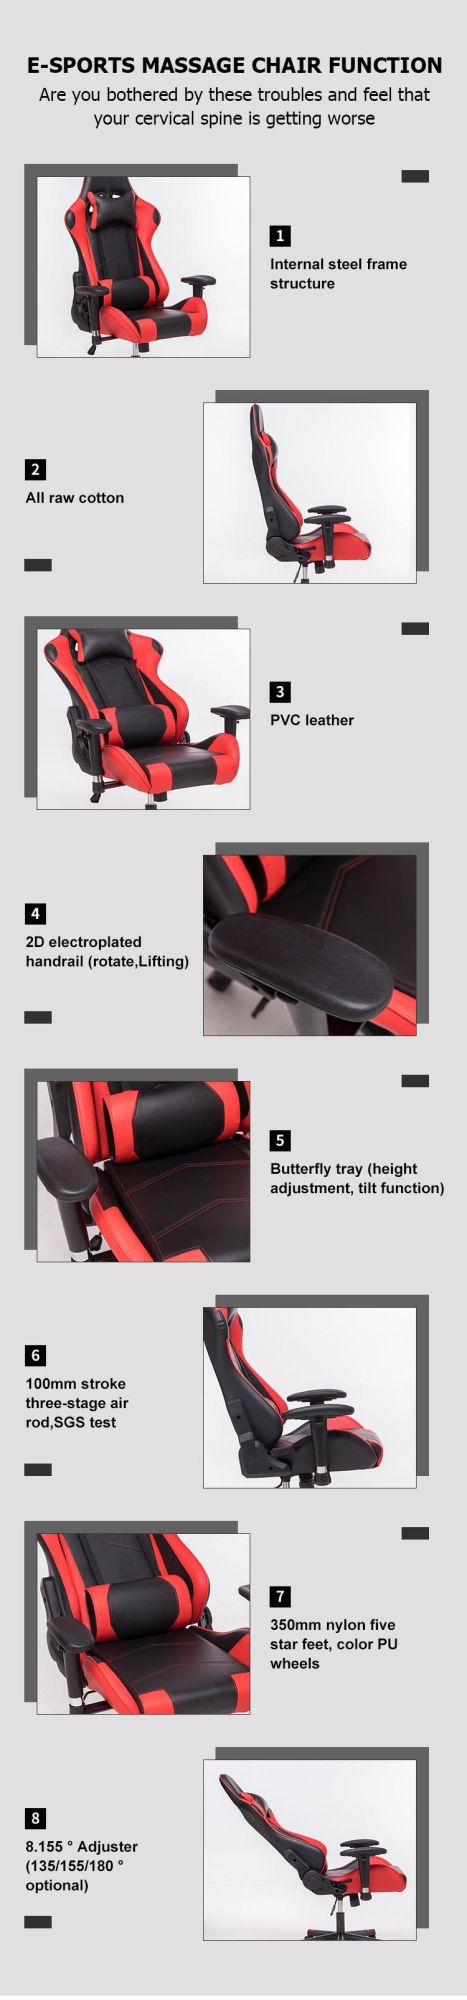 Video Game Chair Executive Rotating Racing Style Ergonomic Lounge Chair Youtube Computer Office Chair Head with Headrest